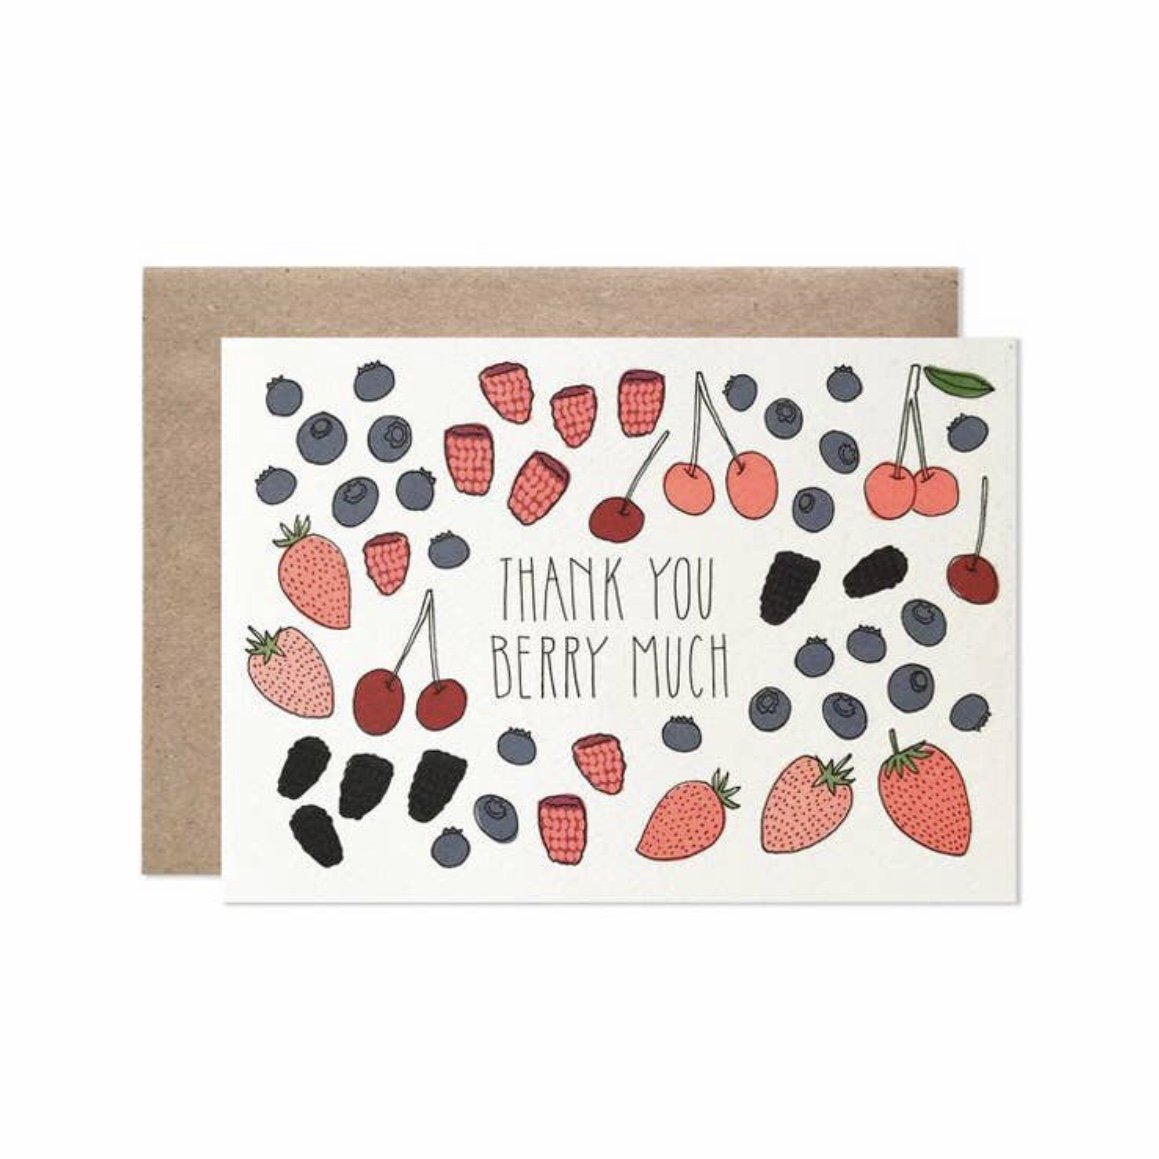 Thank you Berry much greeting card